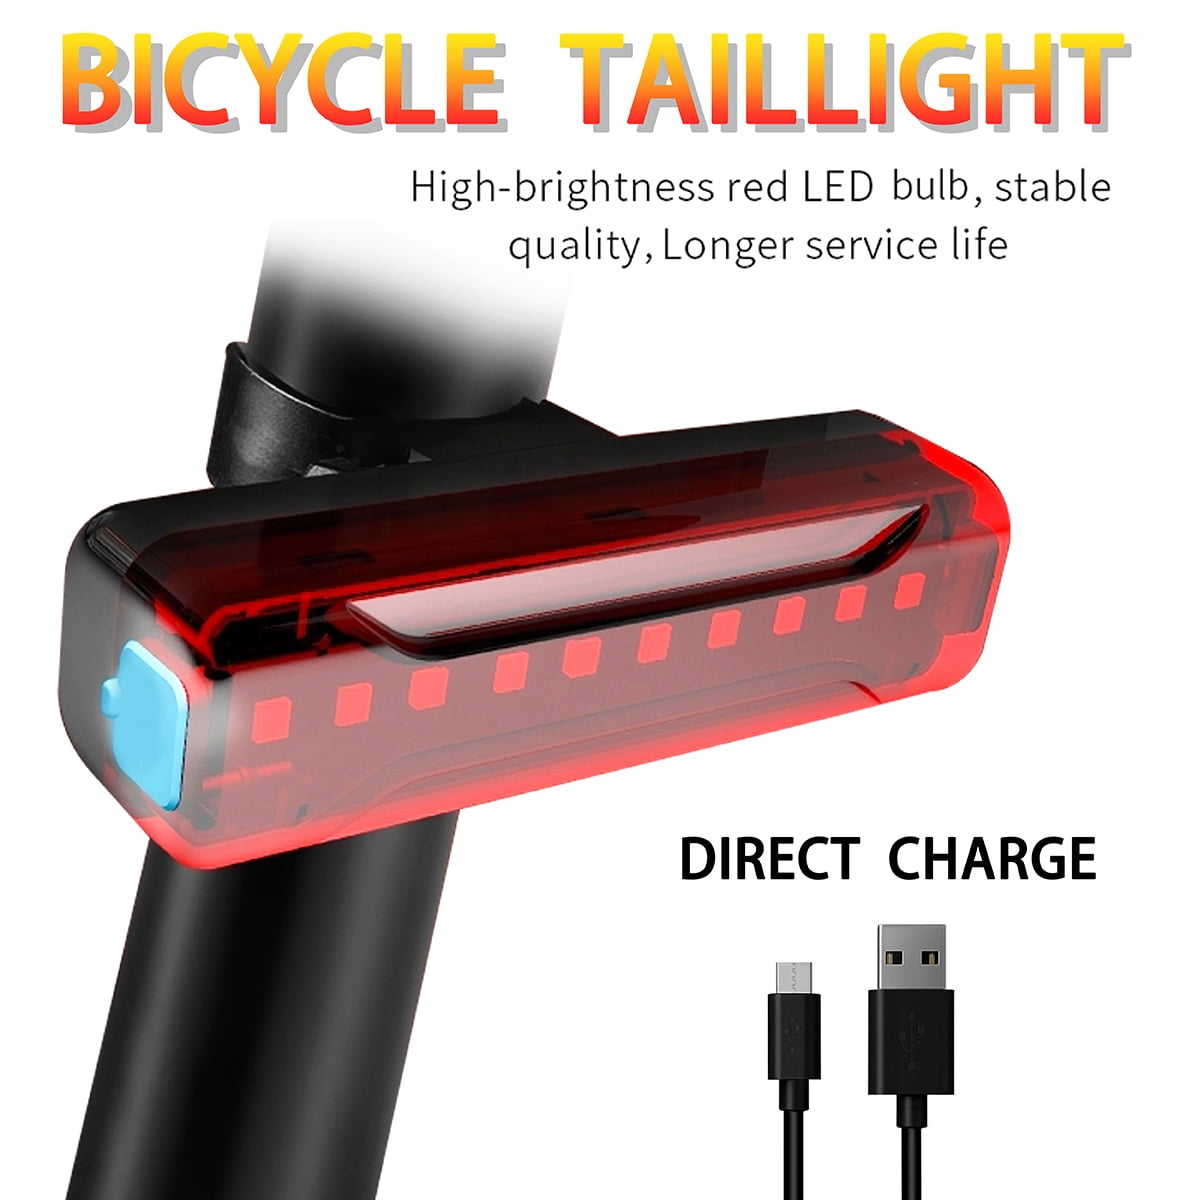 Cycling Bike Bicycle Safety Warning Rear Tail Light Lamp 9LED 7Modes Display Red 